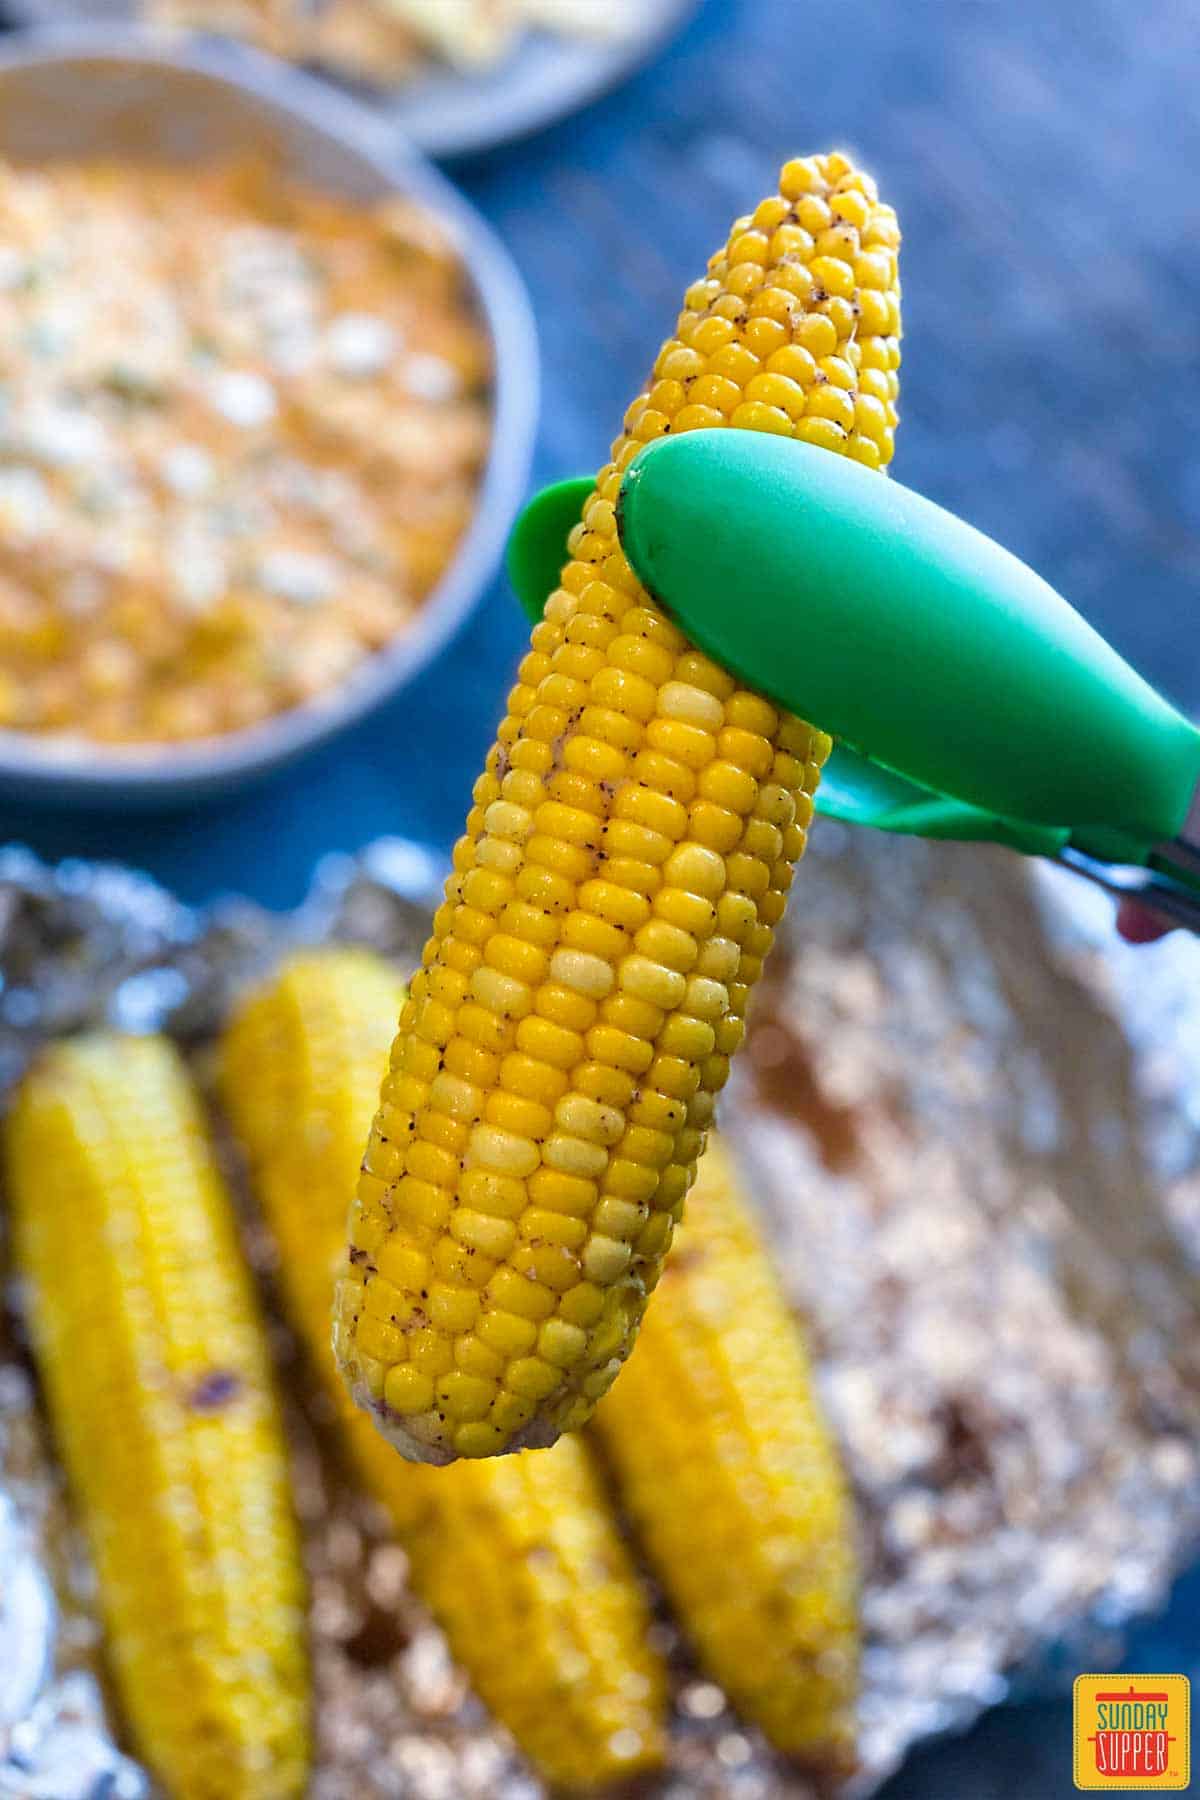 Lifting a corn cob up with silicone tongs over the foil pack of three corn cobs